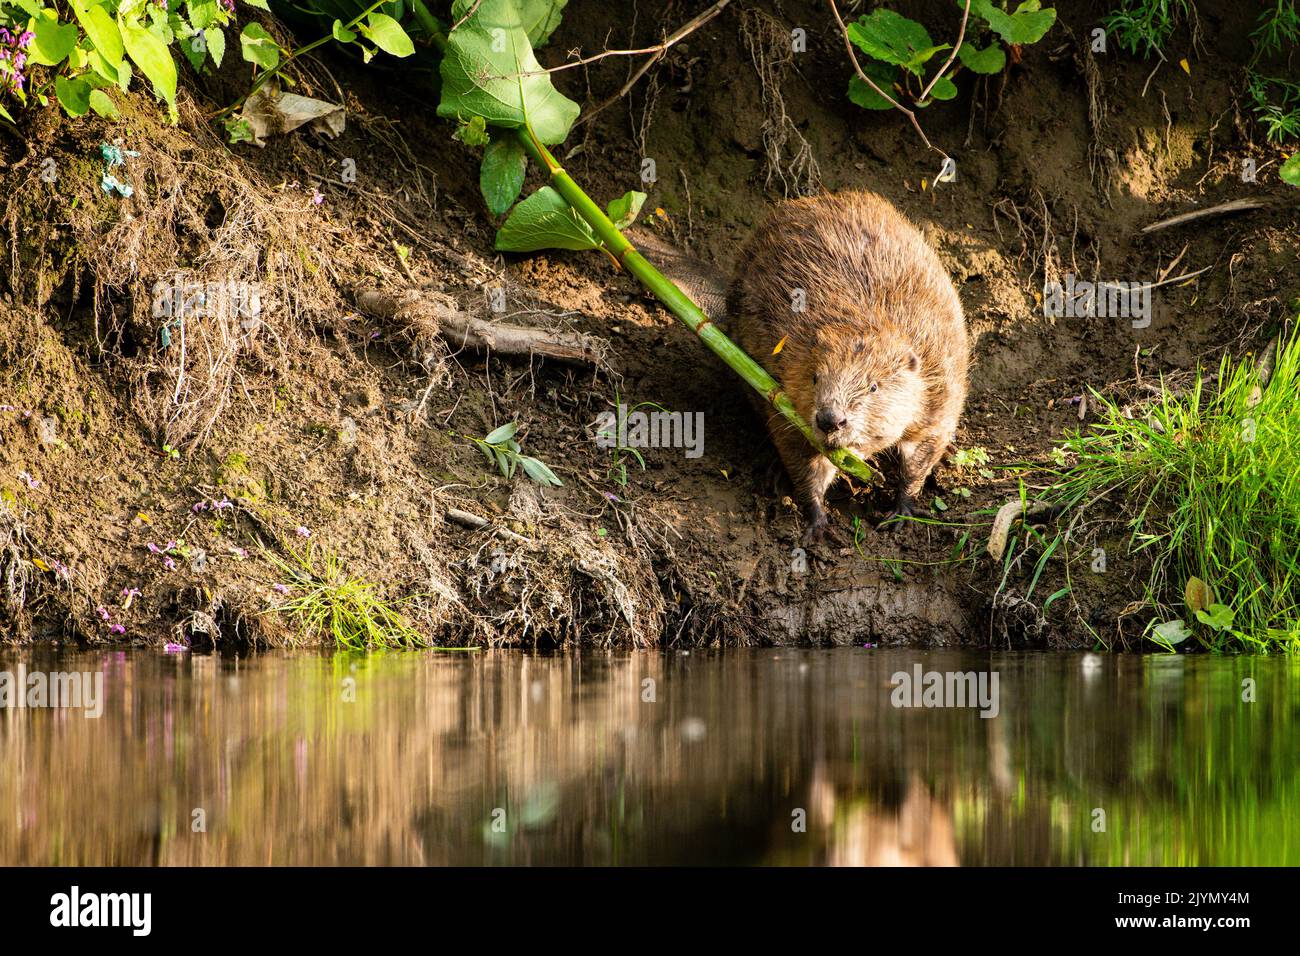 European beaver (Castor fiber) retrieving a branch of Japanese knotweed from the bank in summer, Alsace, France Stock Photo